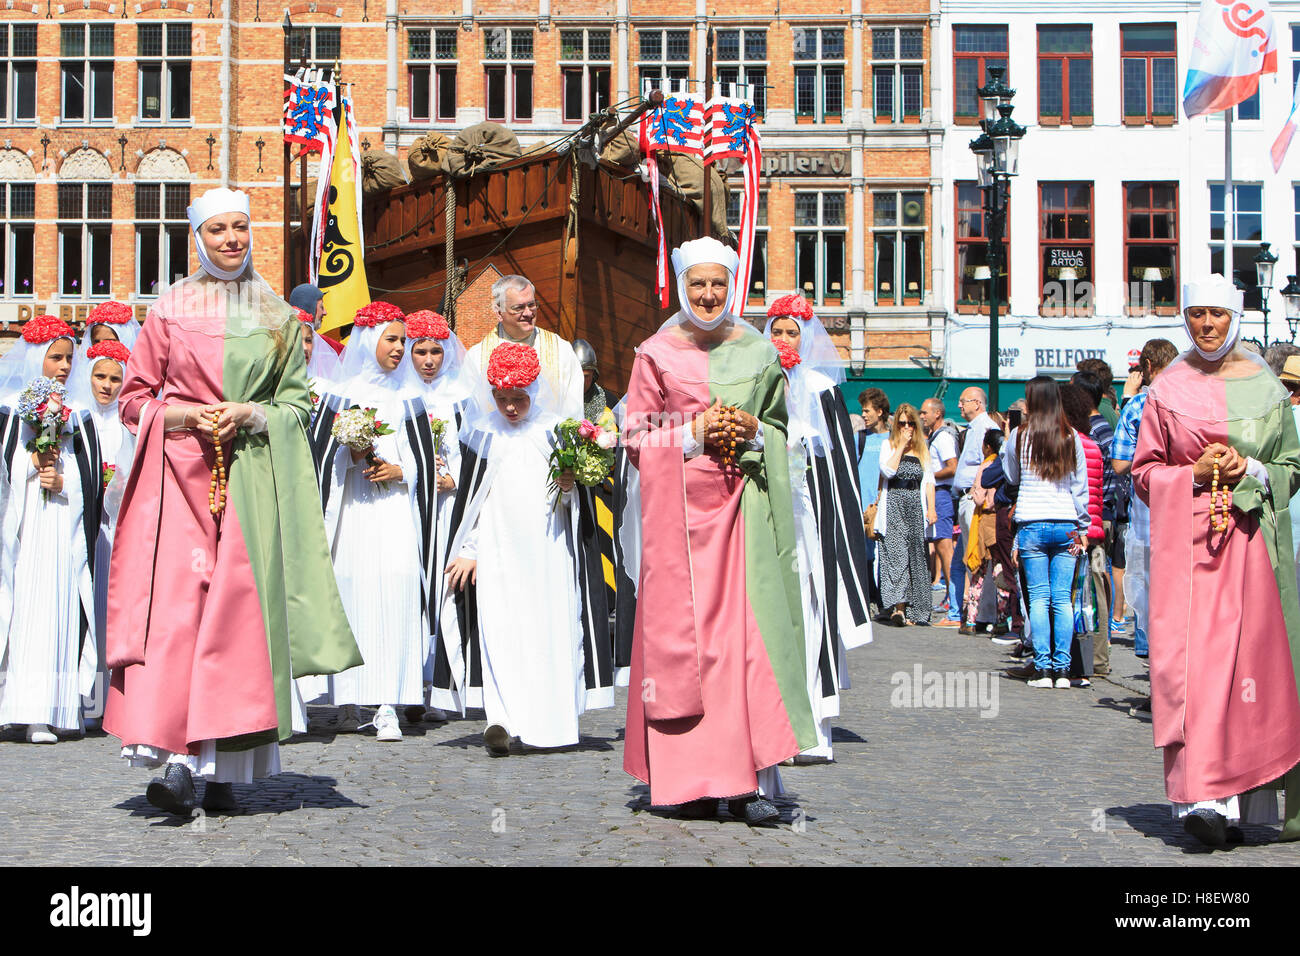 The Bruges' Promise Procession (a medieval Catholic parade held every year since 1304) in Bruges, Belgium Stock Photo